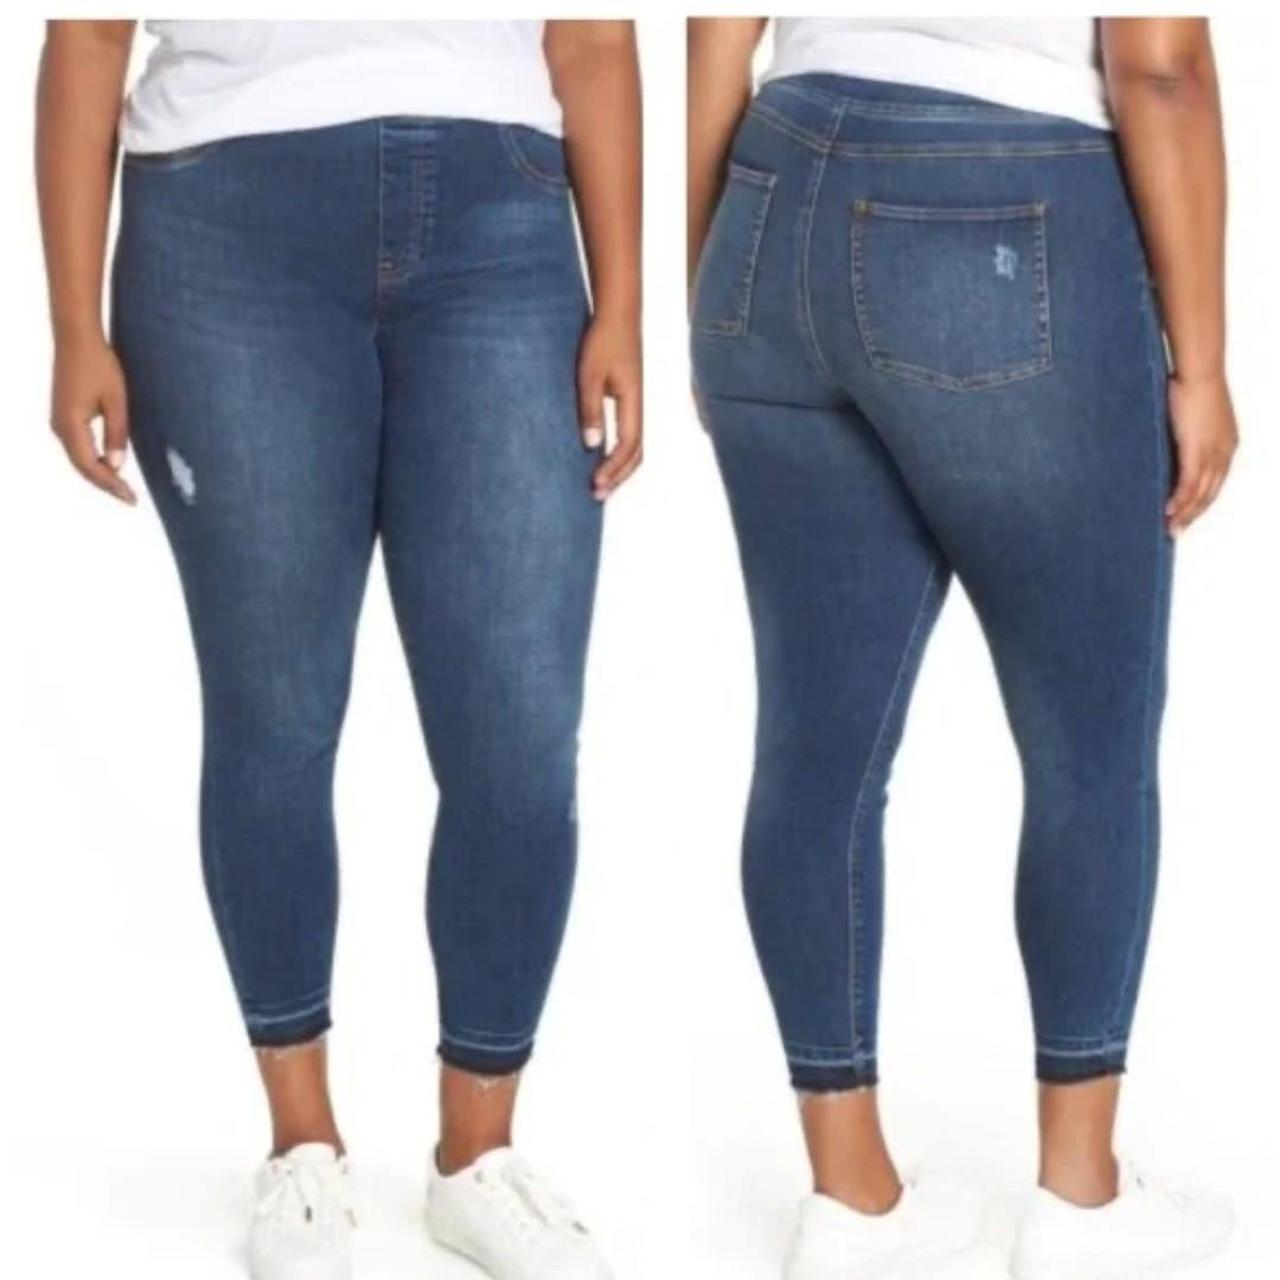 Spanx high rise skinny jeans in light wash